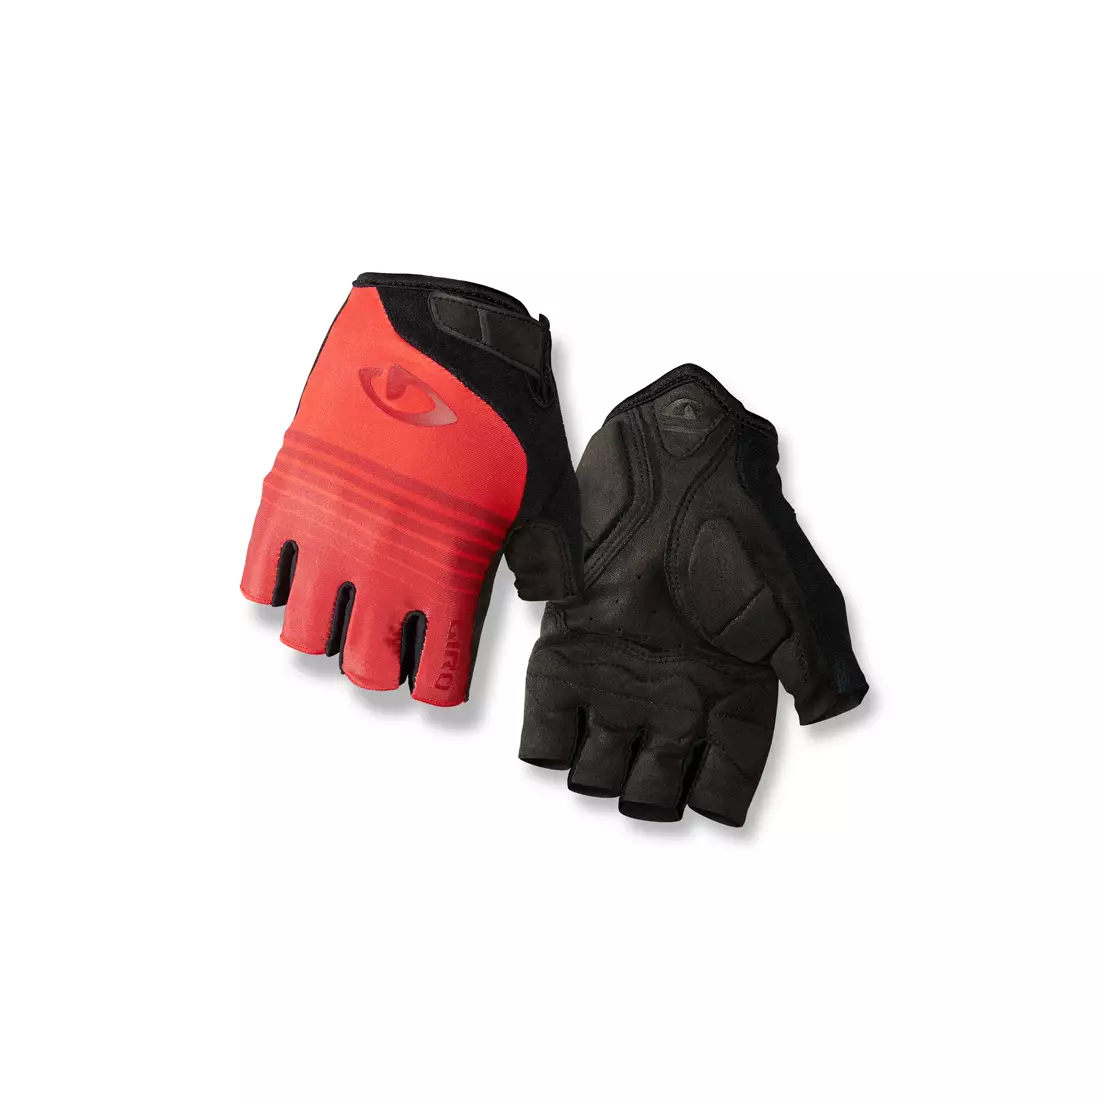 GIRO JAG cycling gloves, red